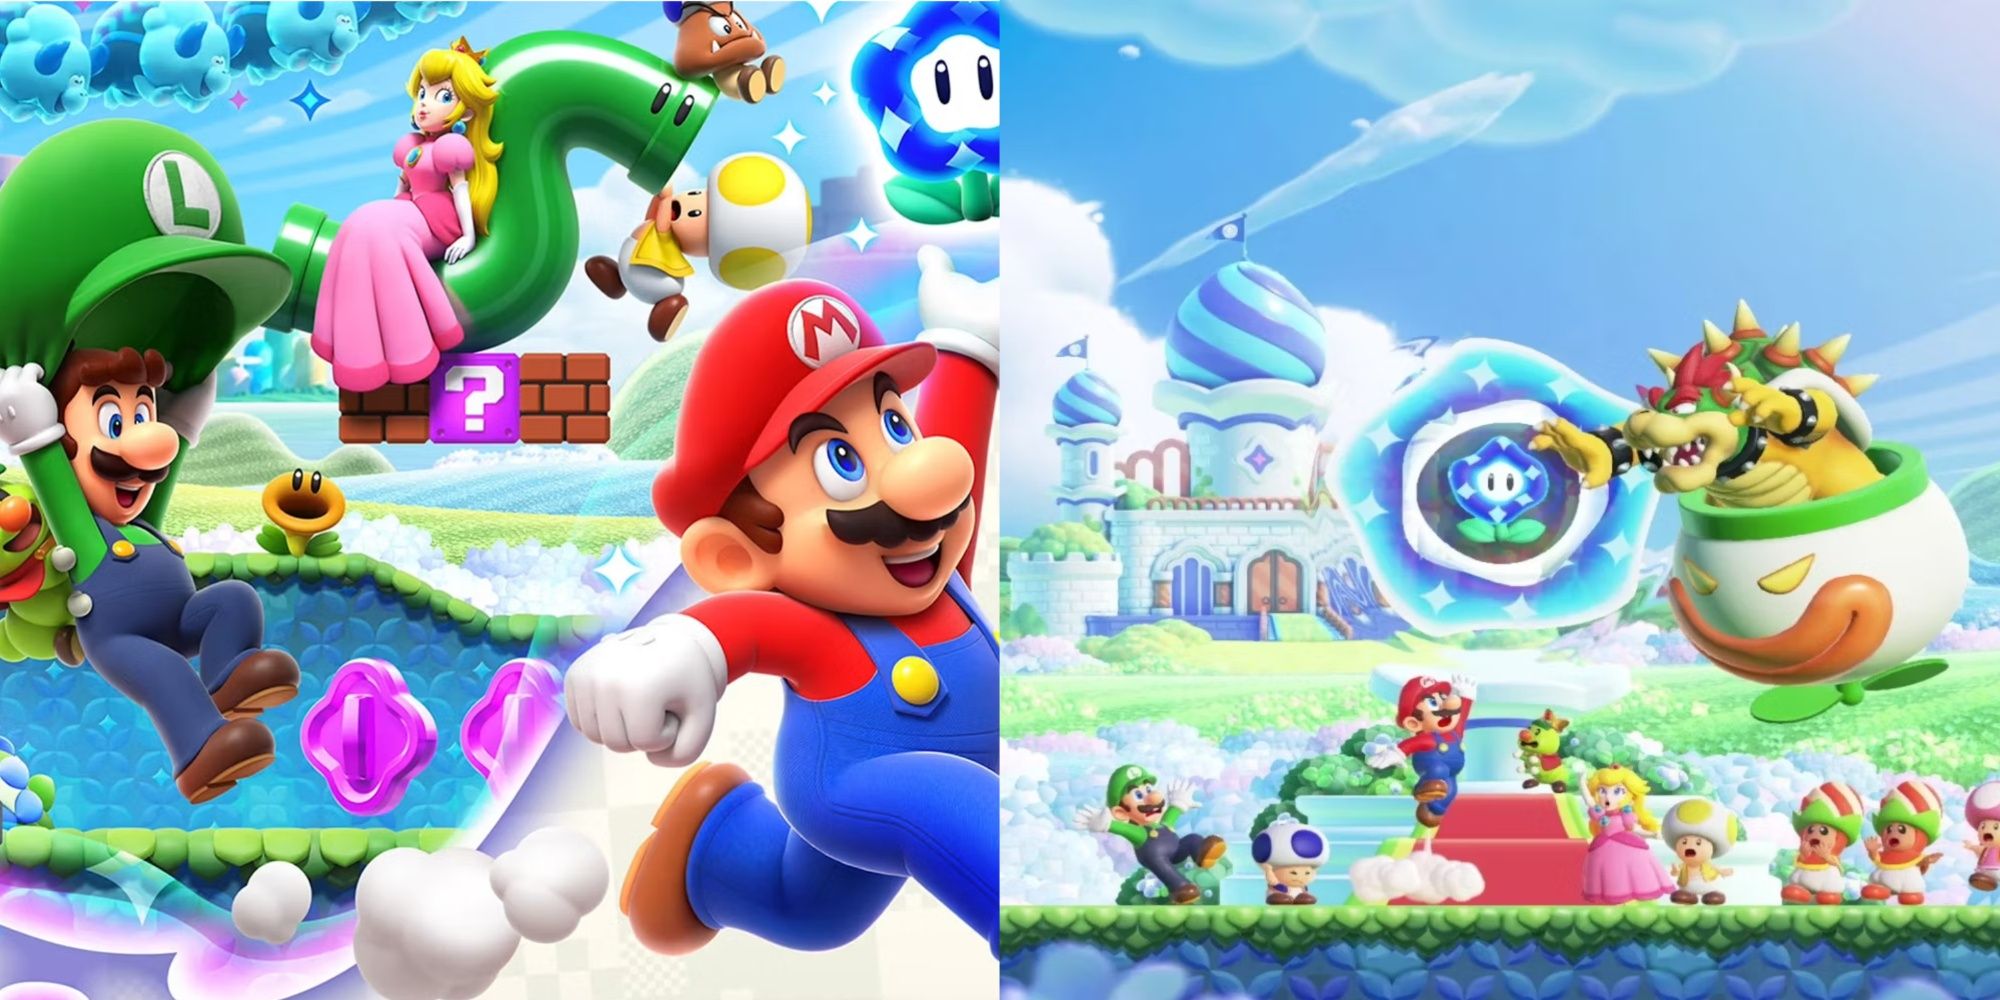 Mario and Friends In Mario Wonder on both the cover art and in-game with Bowser and a Wonder Flower